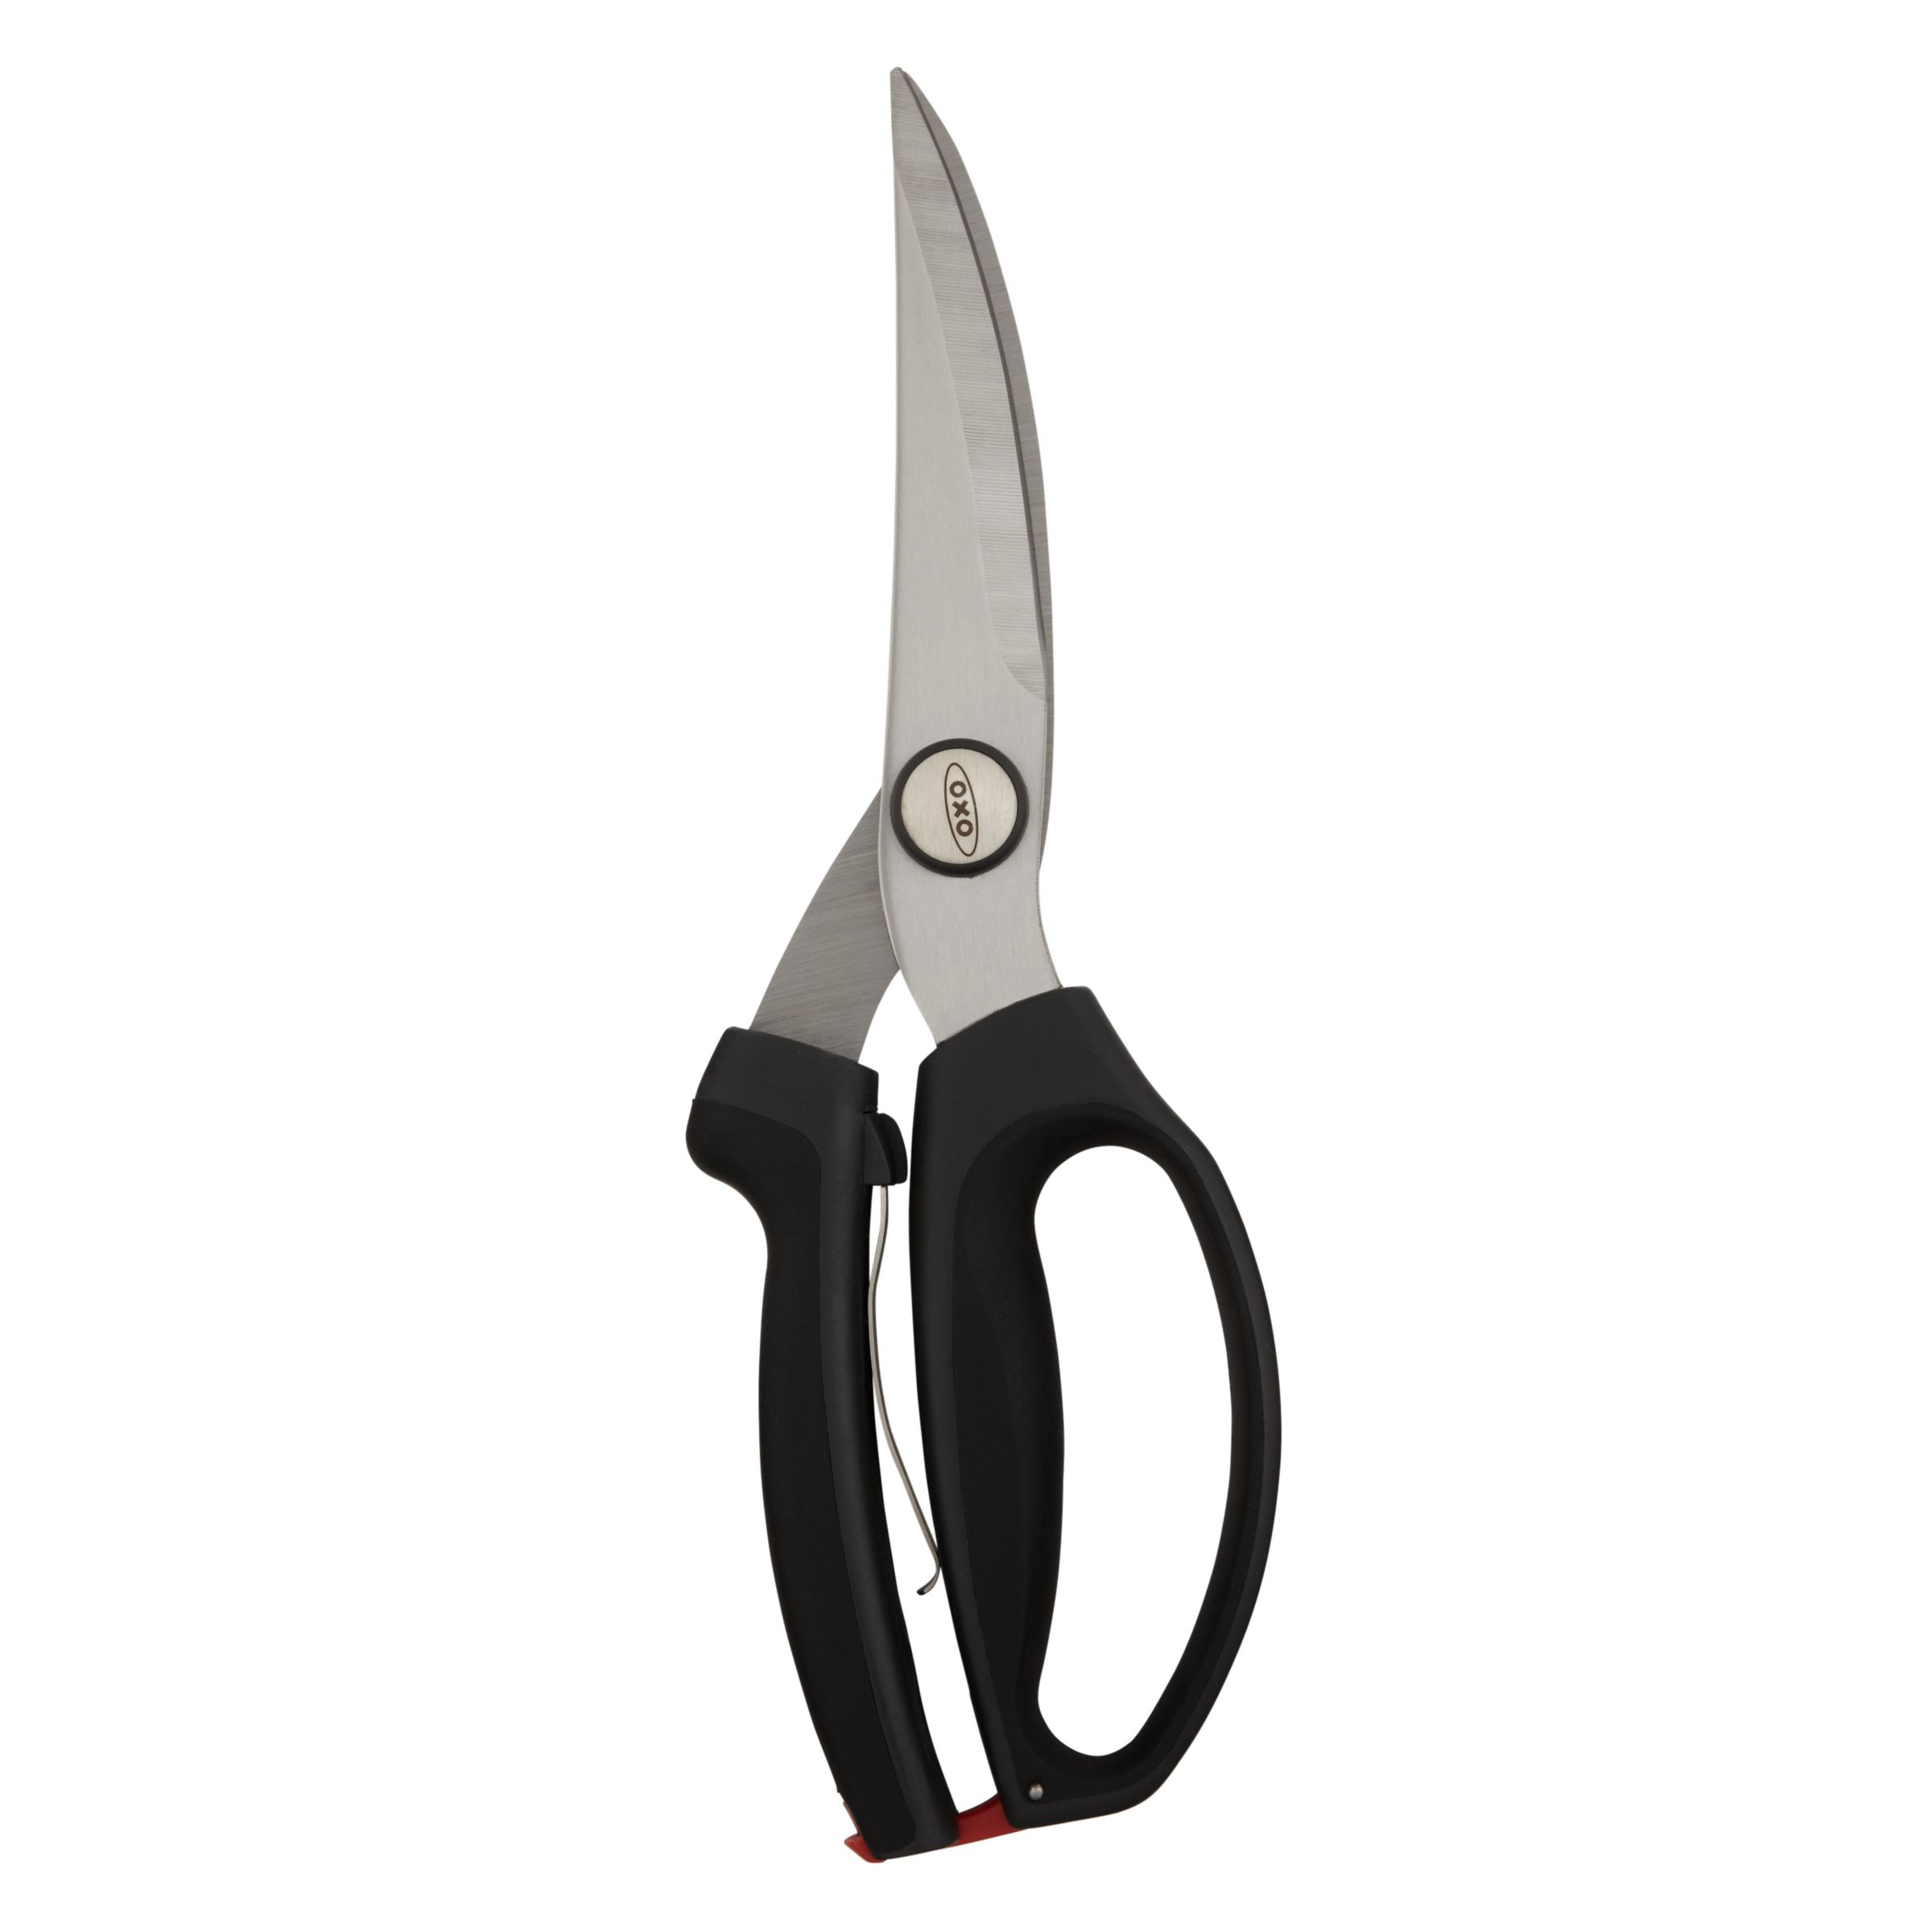 Good Grips Spring-Loaded Poultry Shears, Black